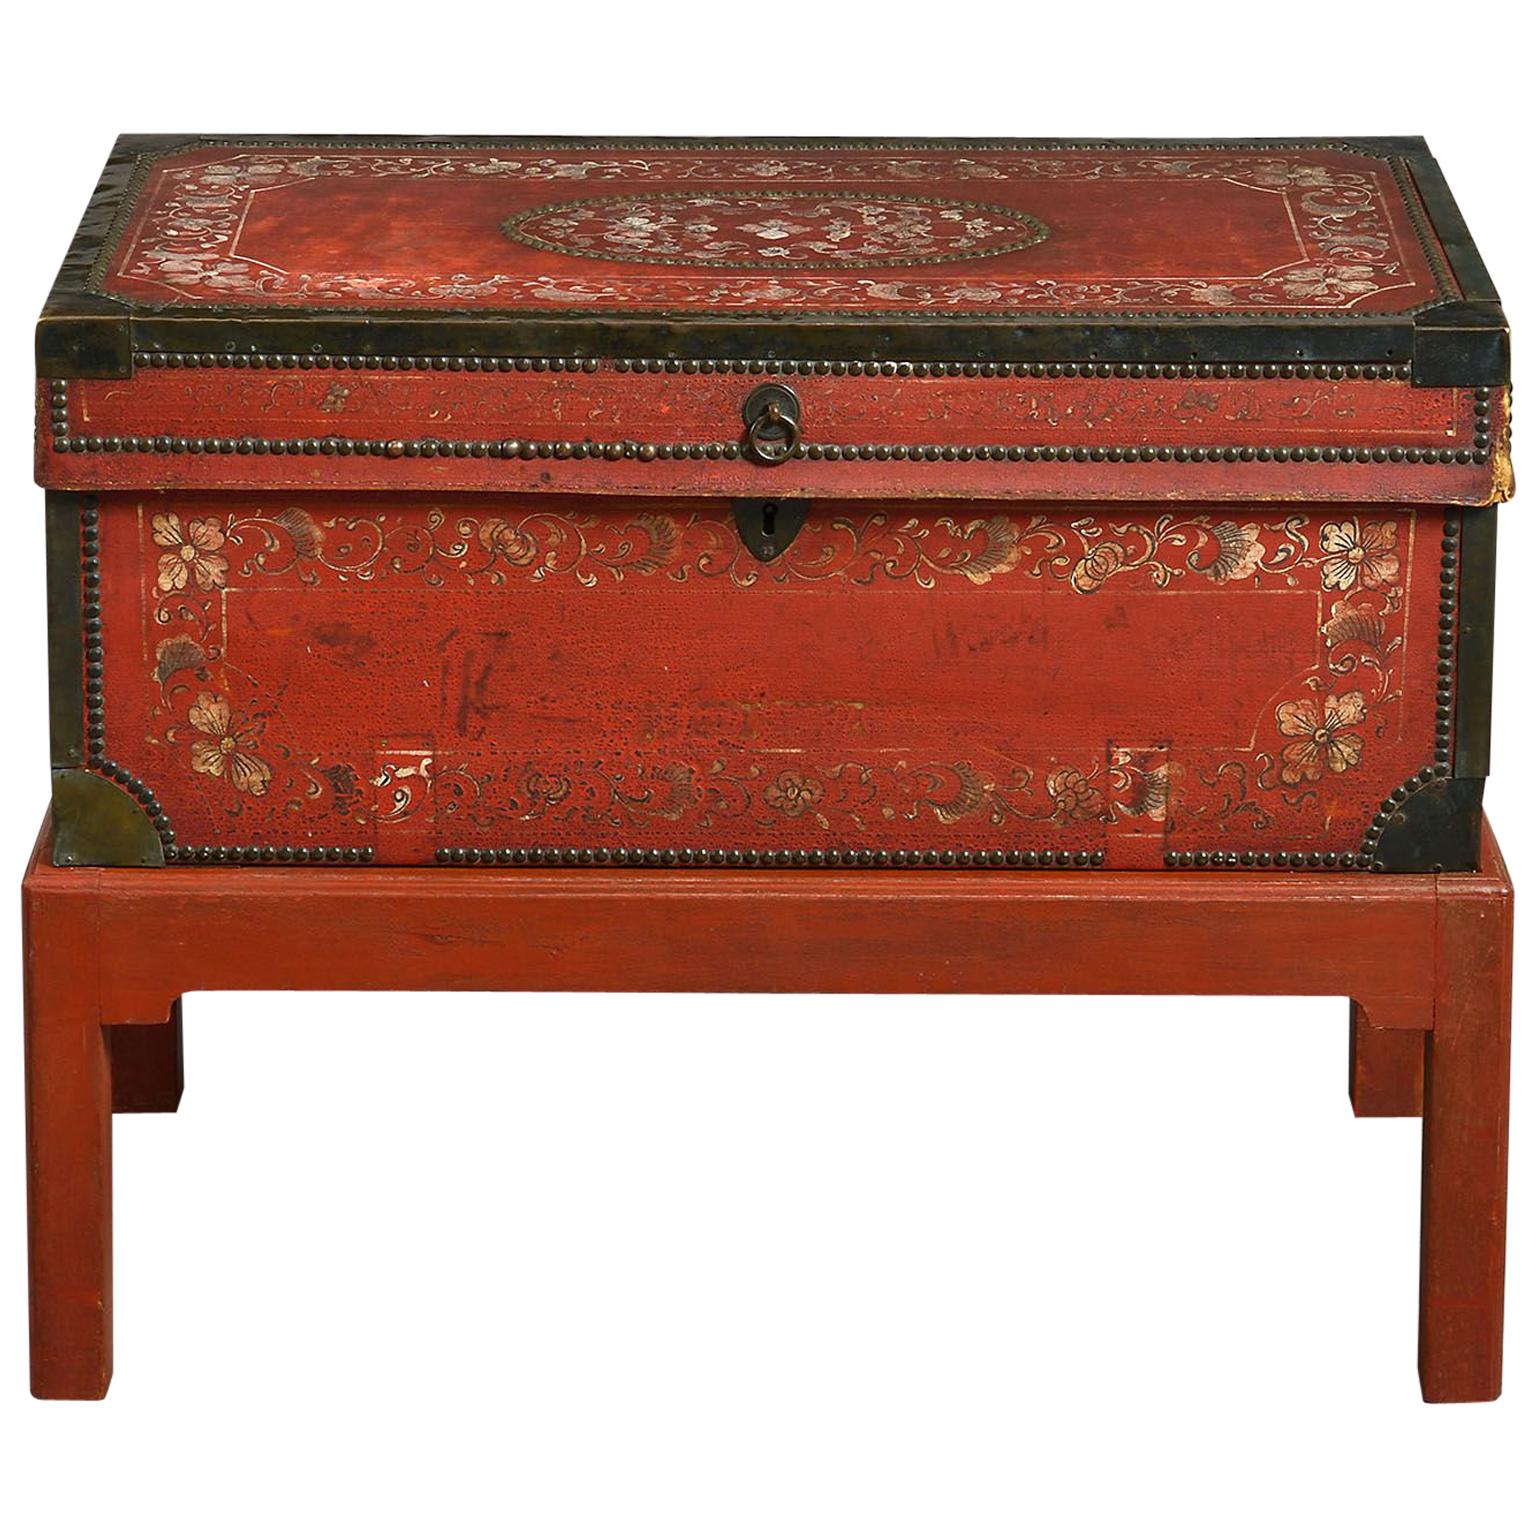 18th Century Chinese Export Painted Leather Trunk For Sale